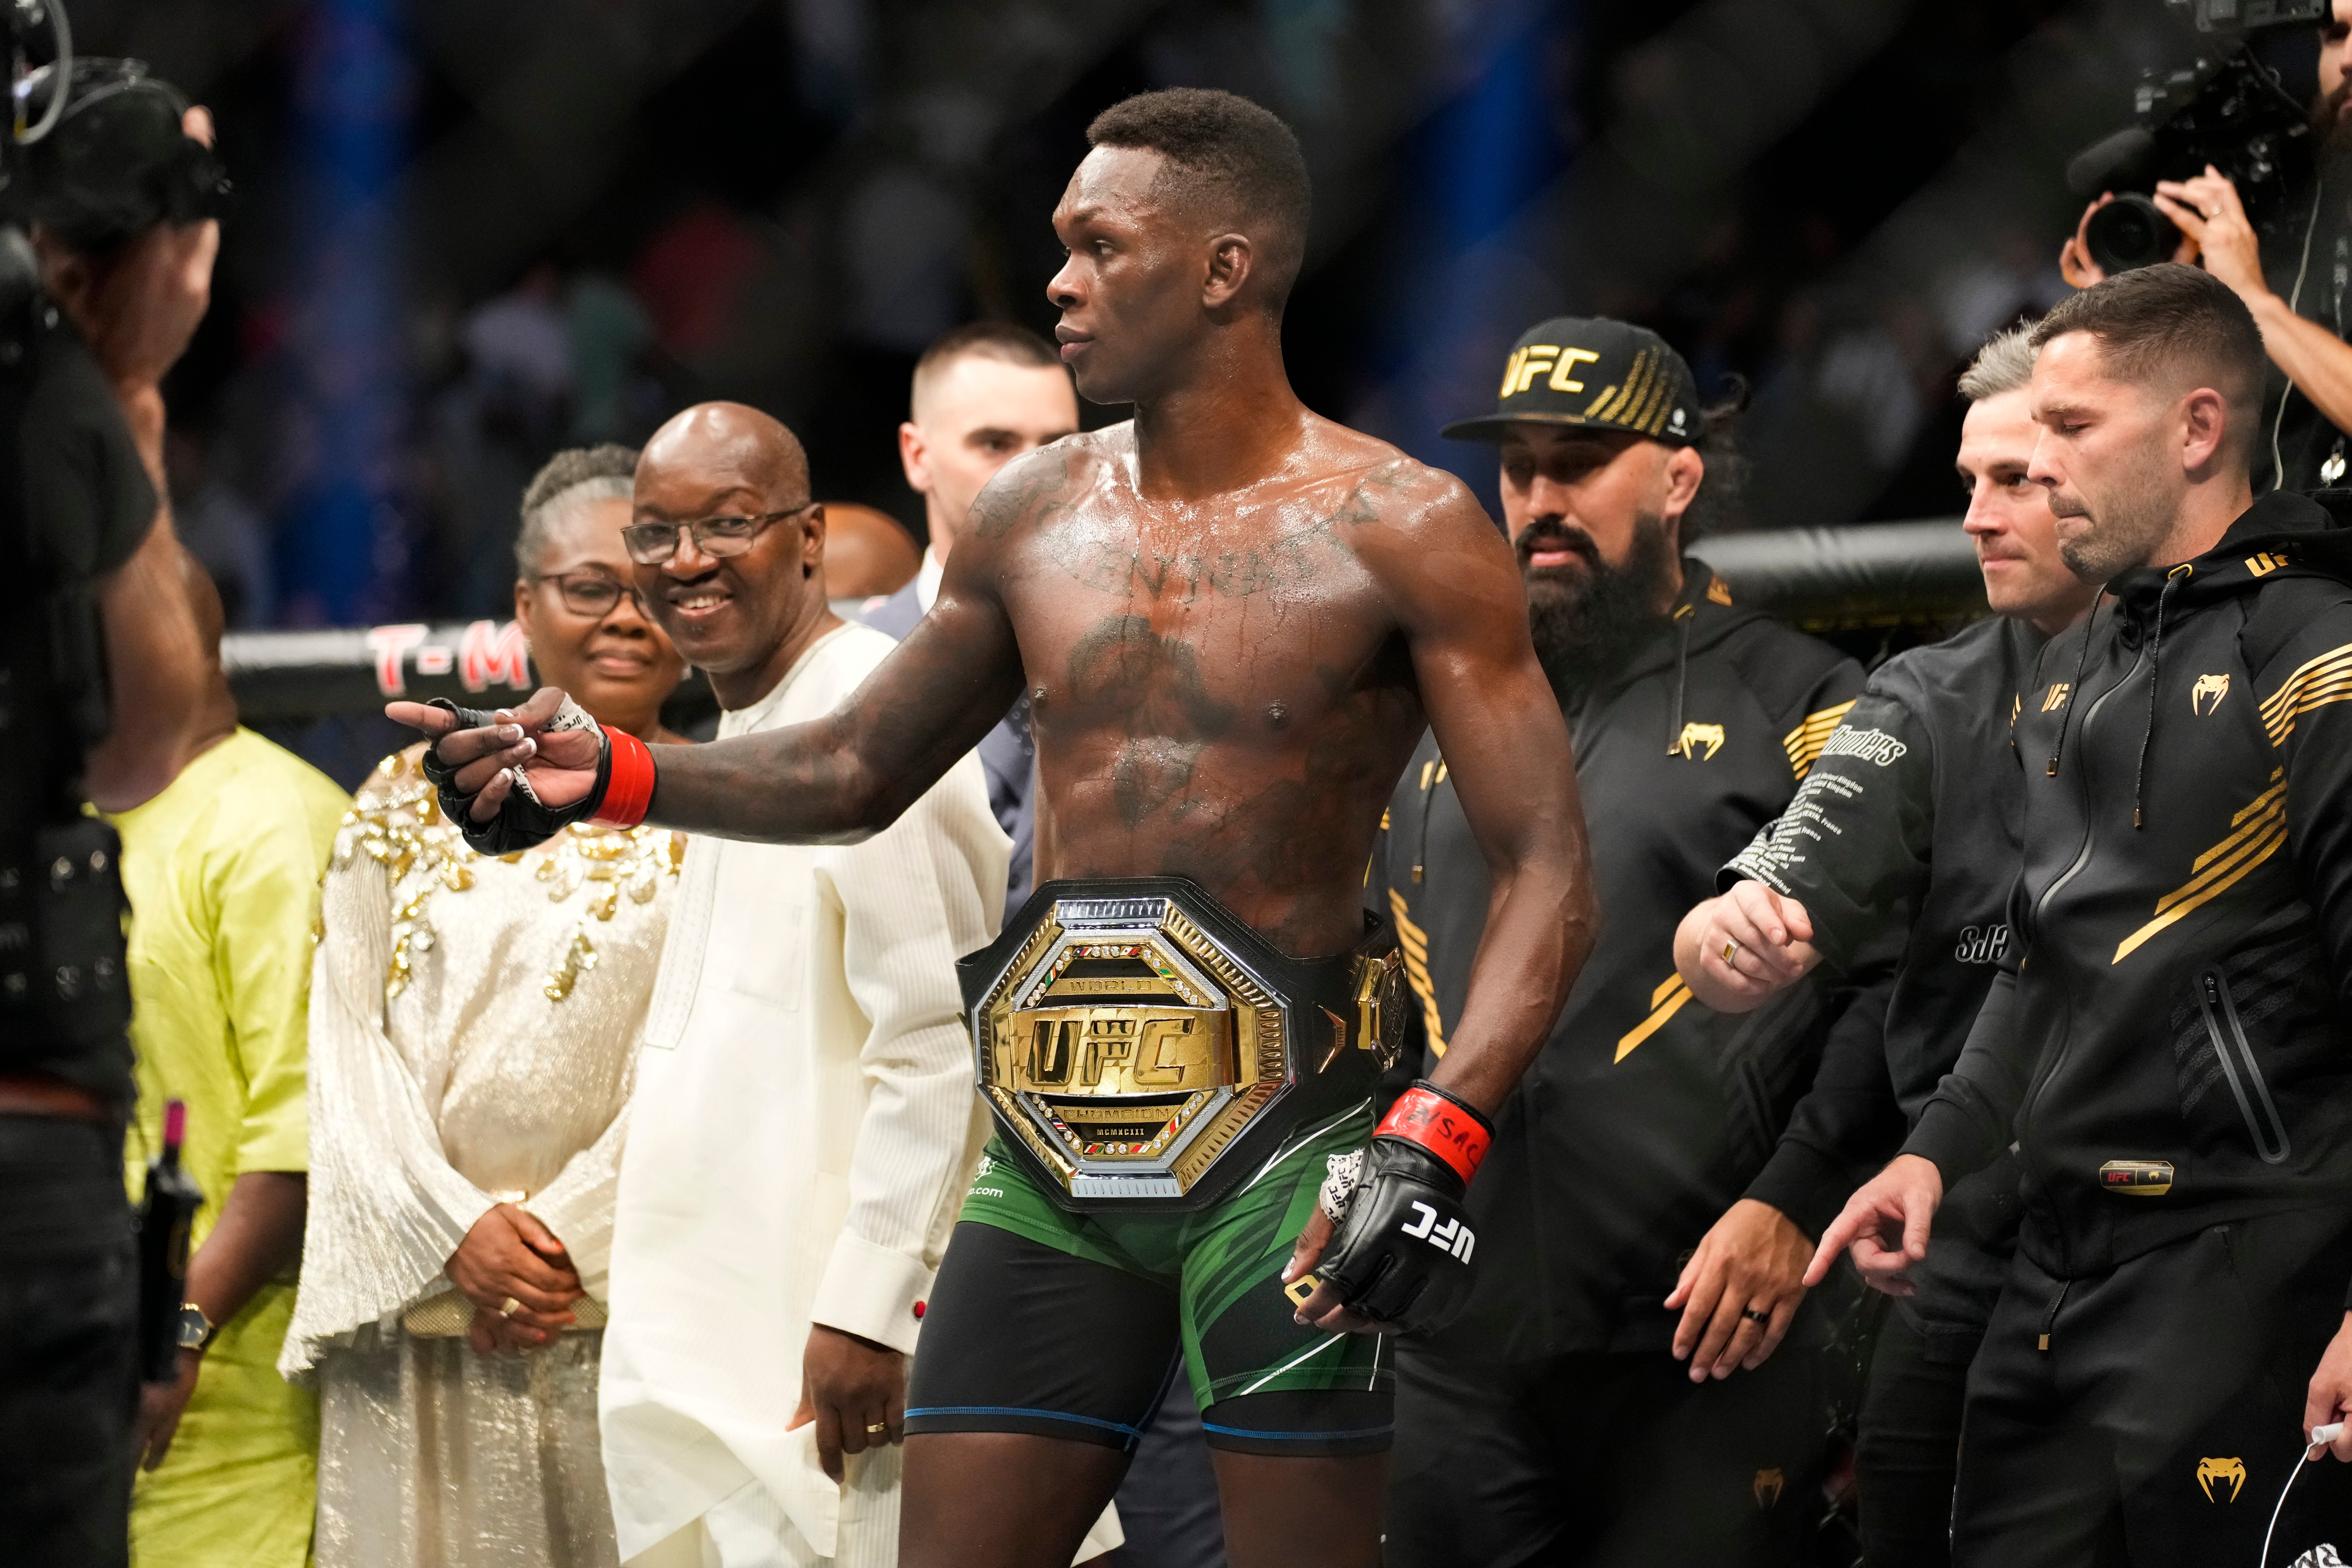 Israel Adesanya after outpointing Jared Cannonier to retain his title (John Locher/PA)